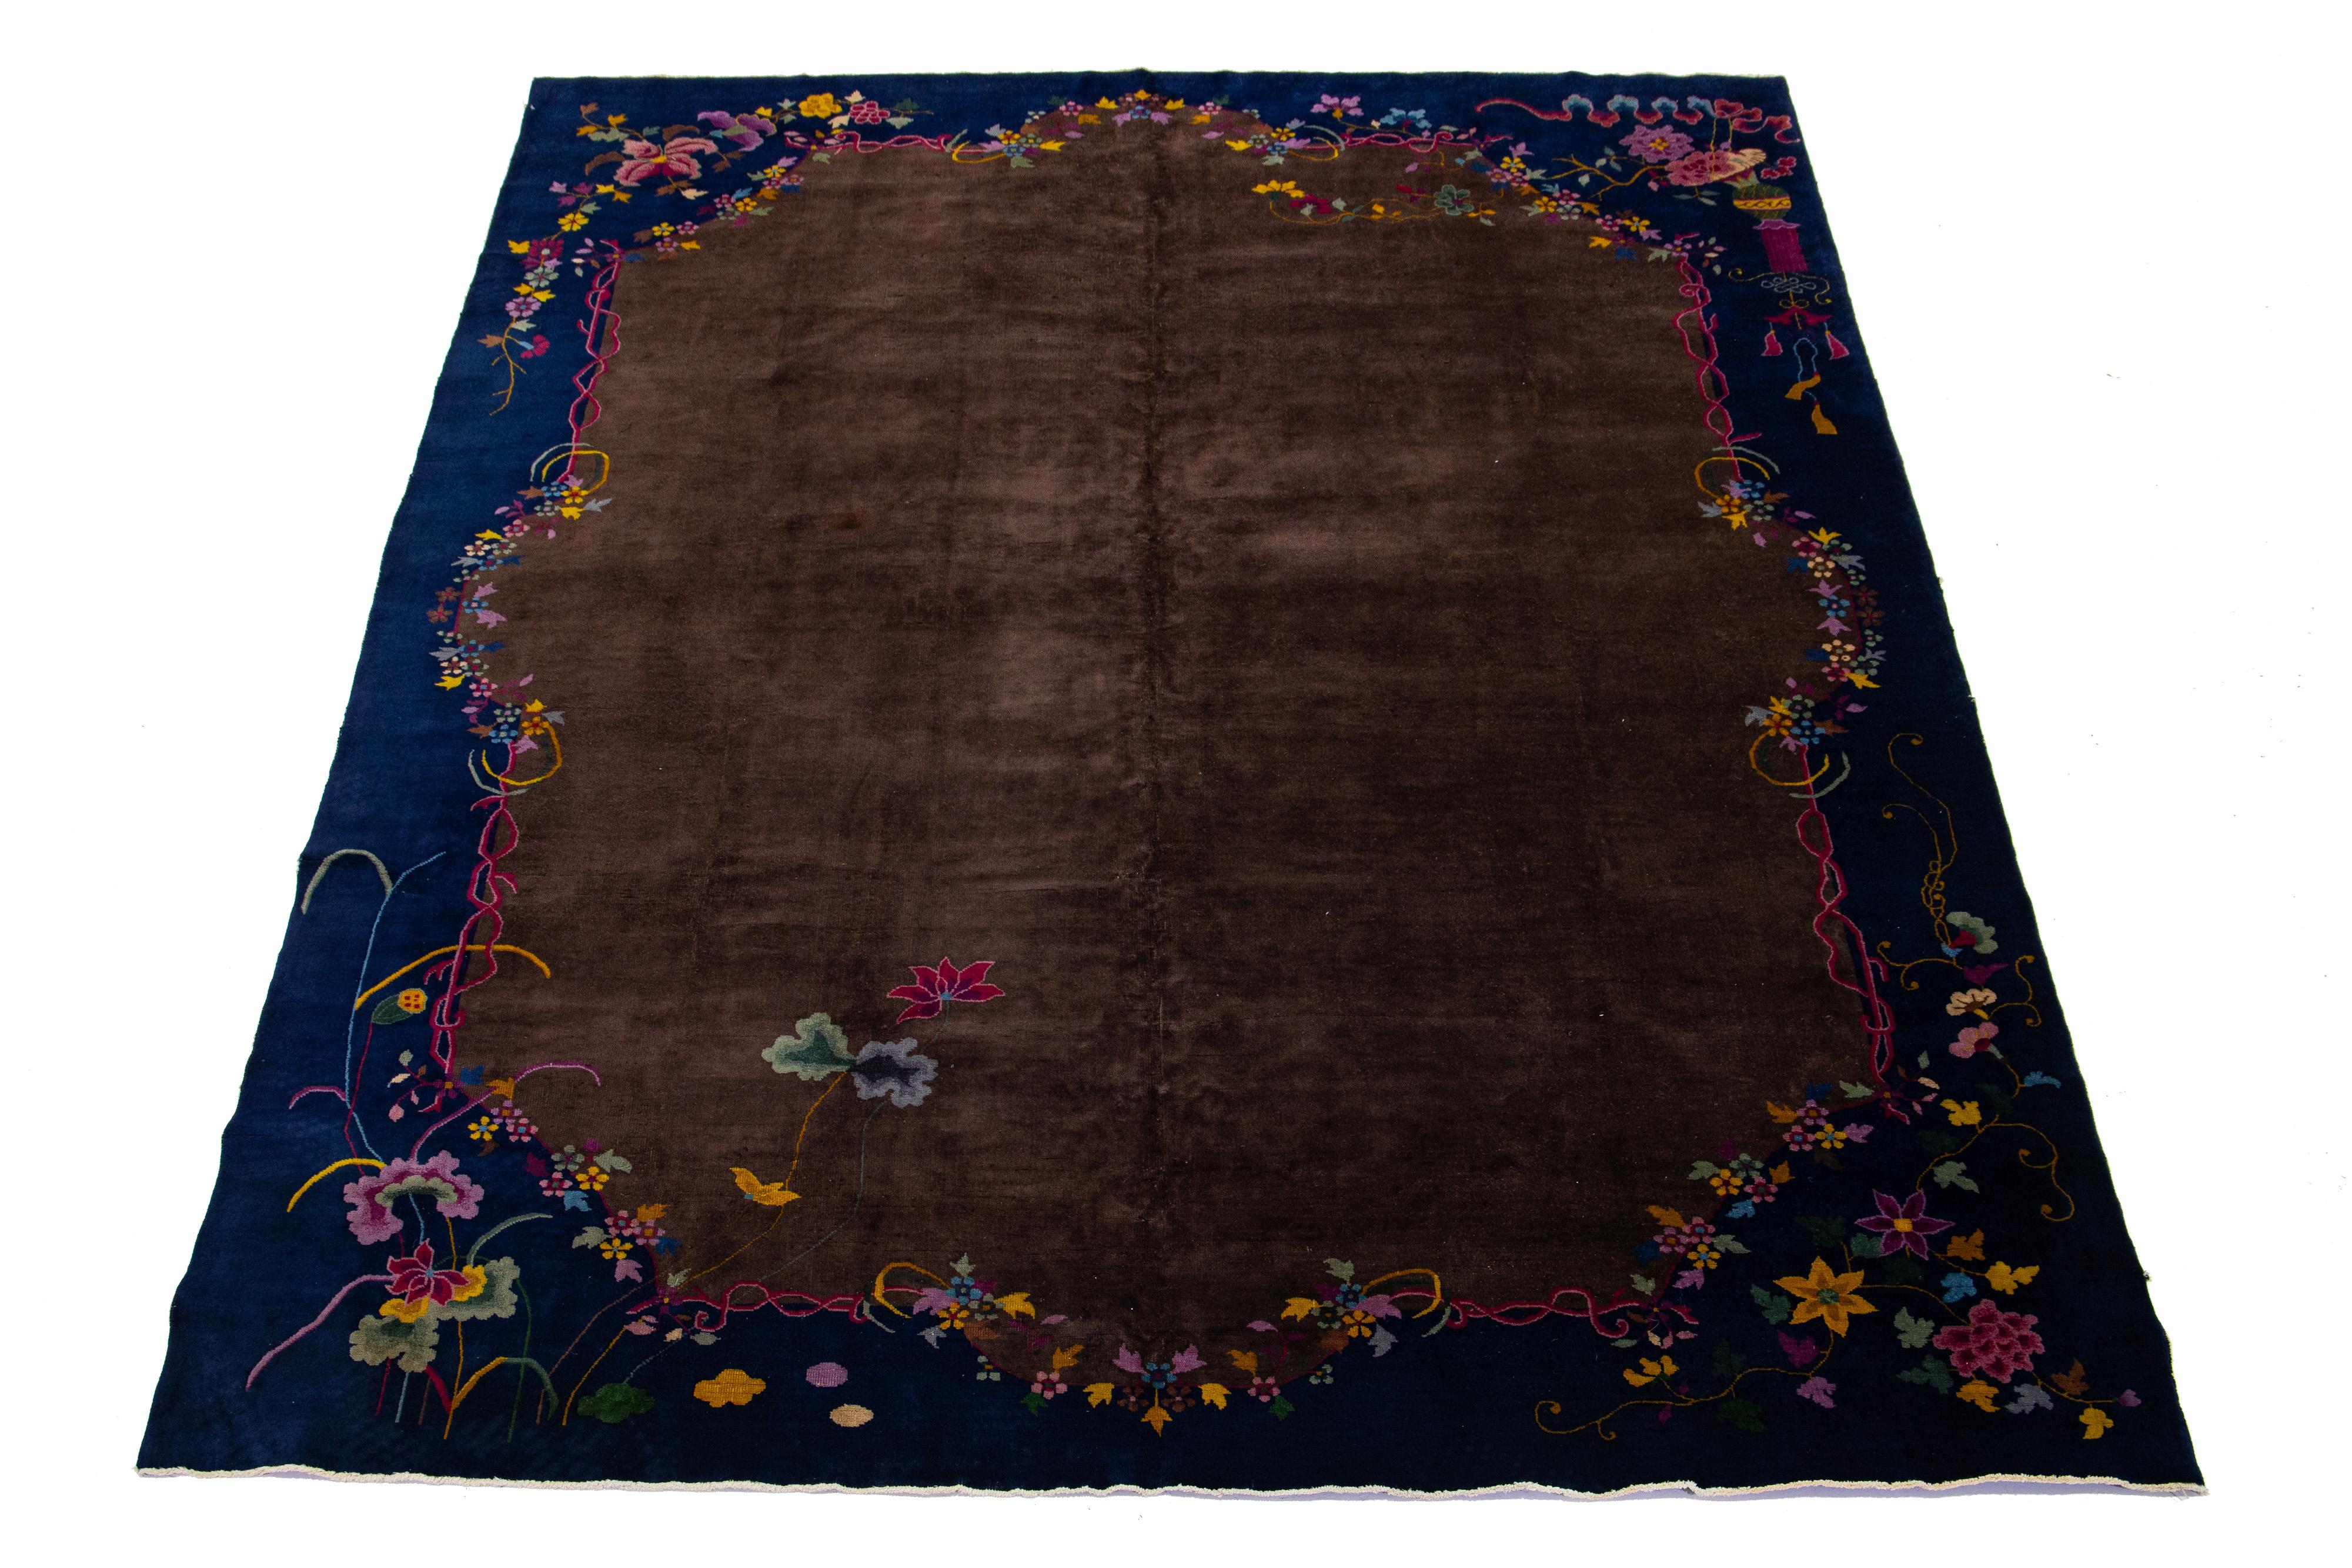 Beautiful antique Chinese Art Deco rug, hand-knotted wool with a brown field. This rug has a navy blue frame and multi-color accents in an all-over, Classic Chinese floral design.

This rug measures 9' x 11'8